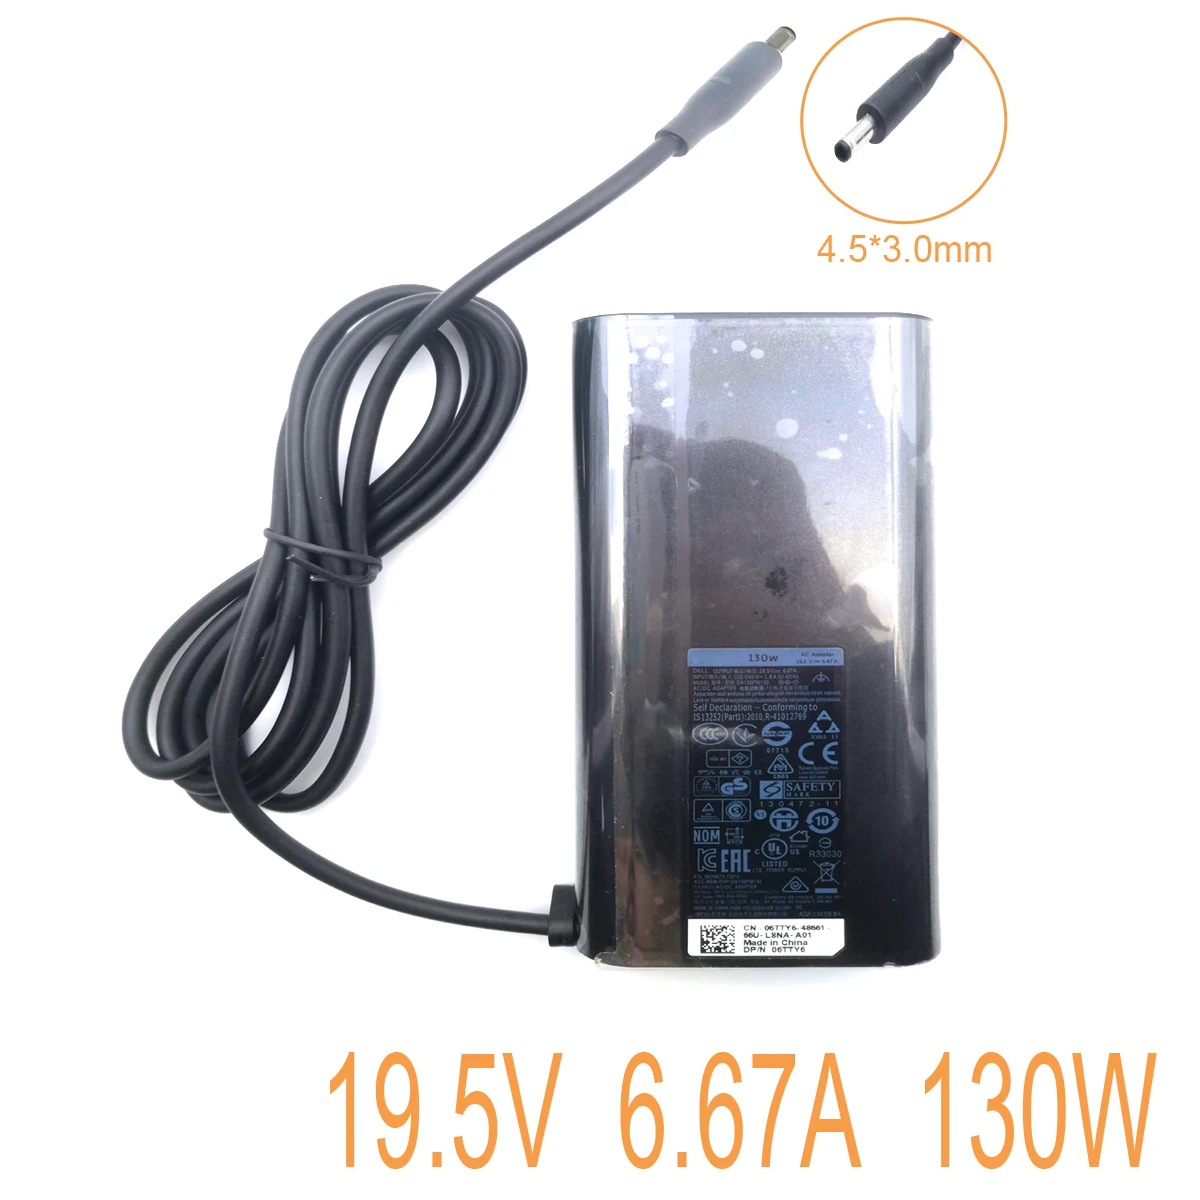 

19.5V 6.67A 130W 4.5*3.0mm New Laptop Adapter Charger For Dell XPS 15 7590 9530 9535 9550 9560 HA130PM130 DA130PM130 06TTY6